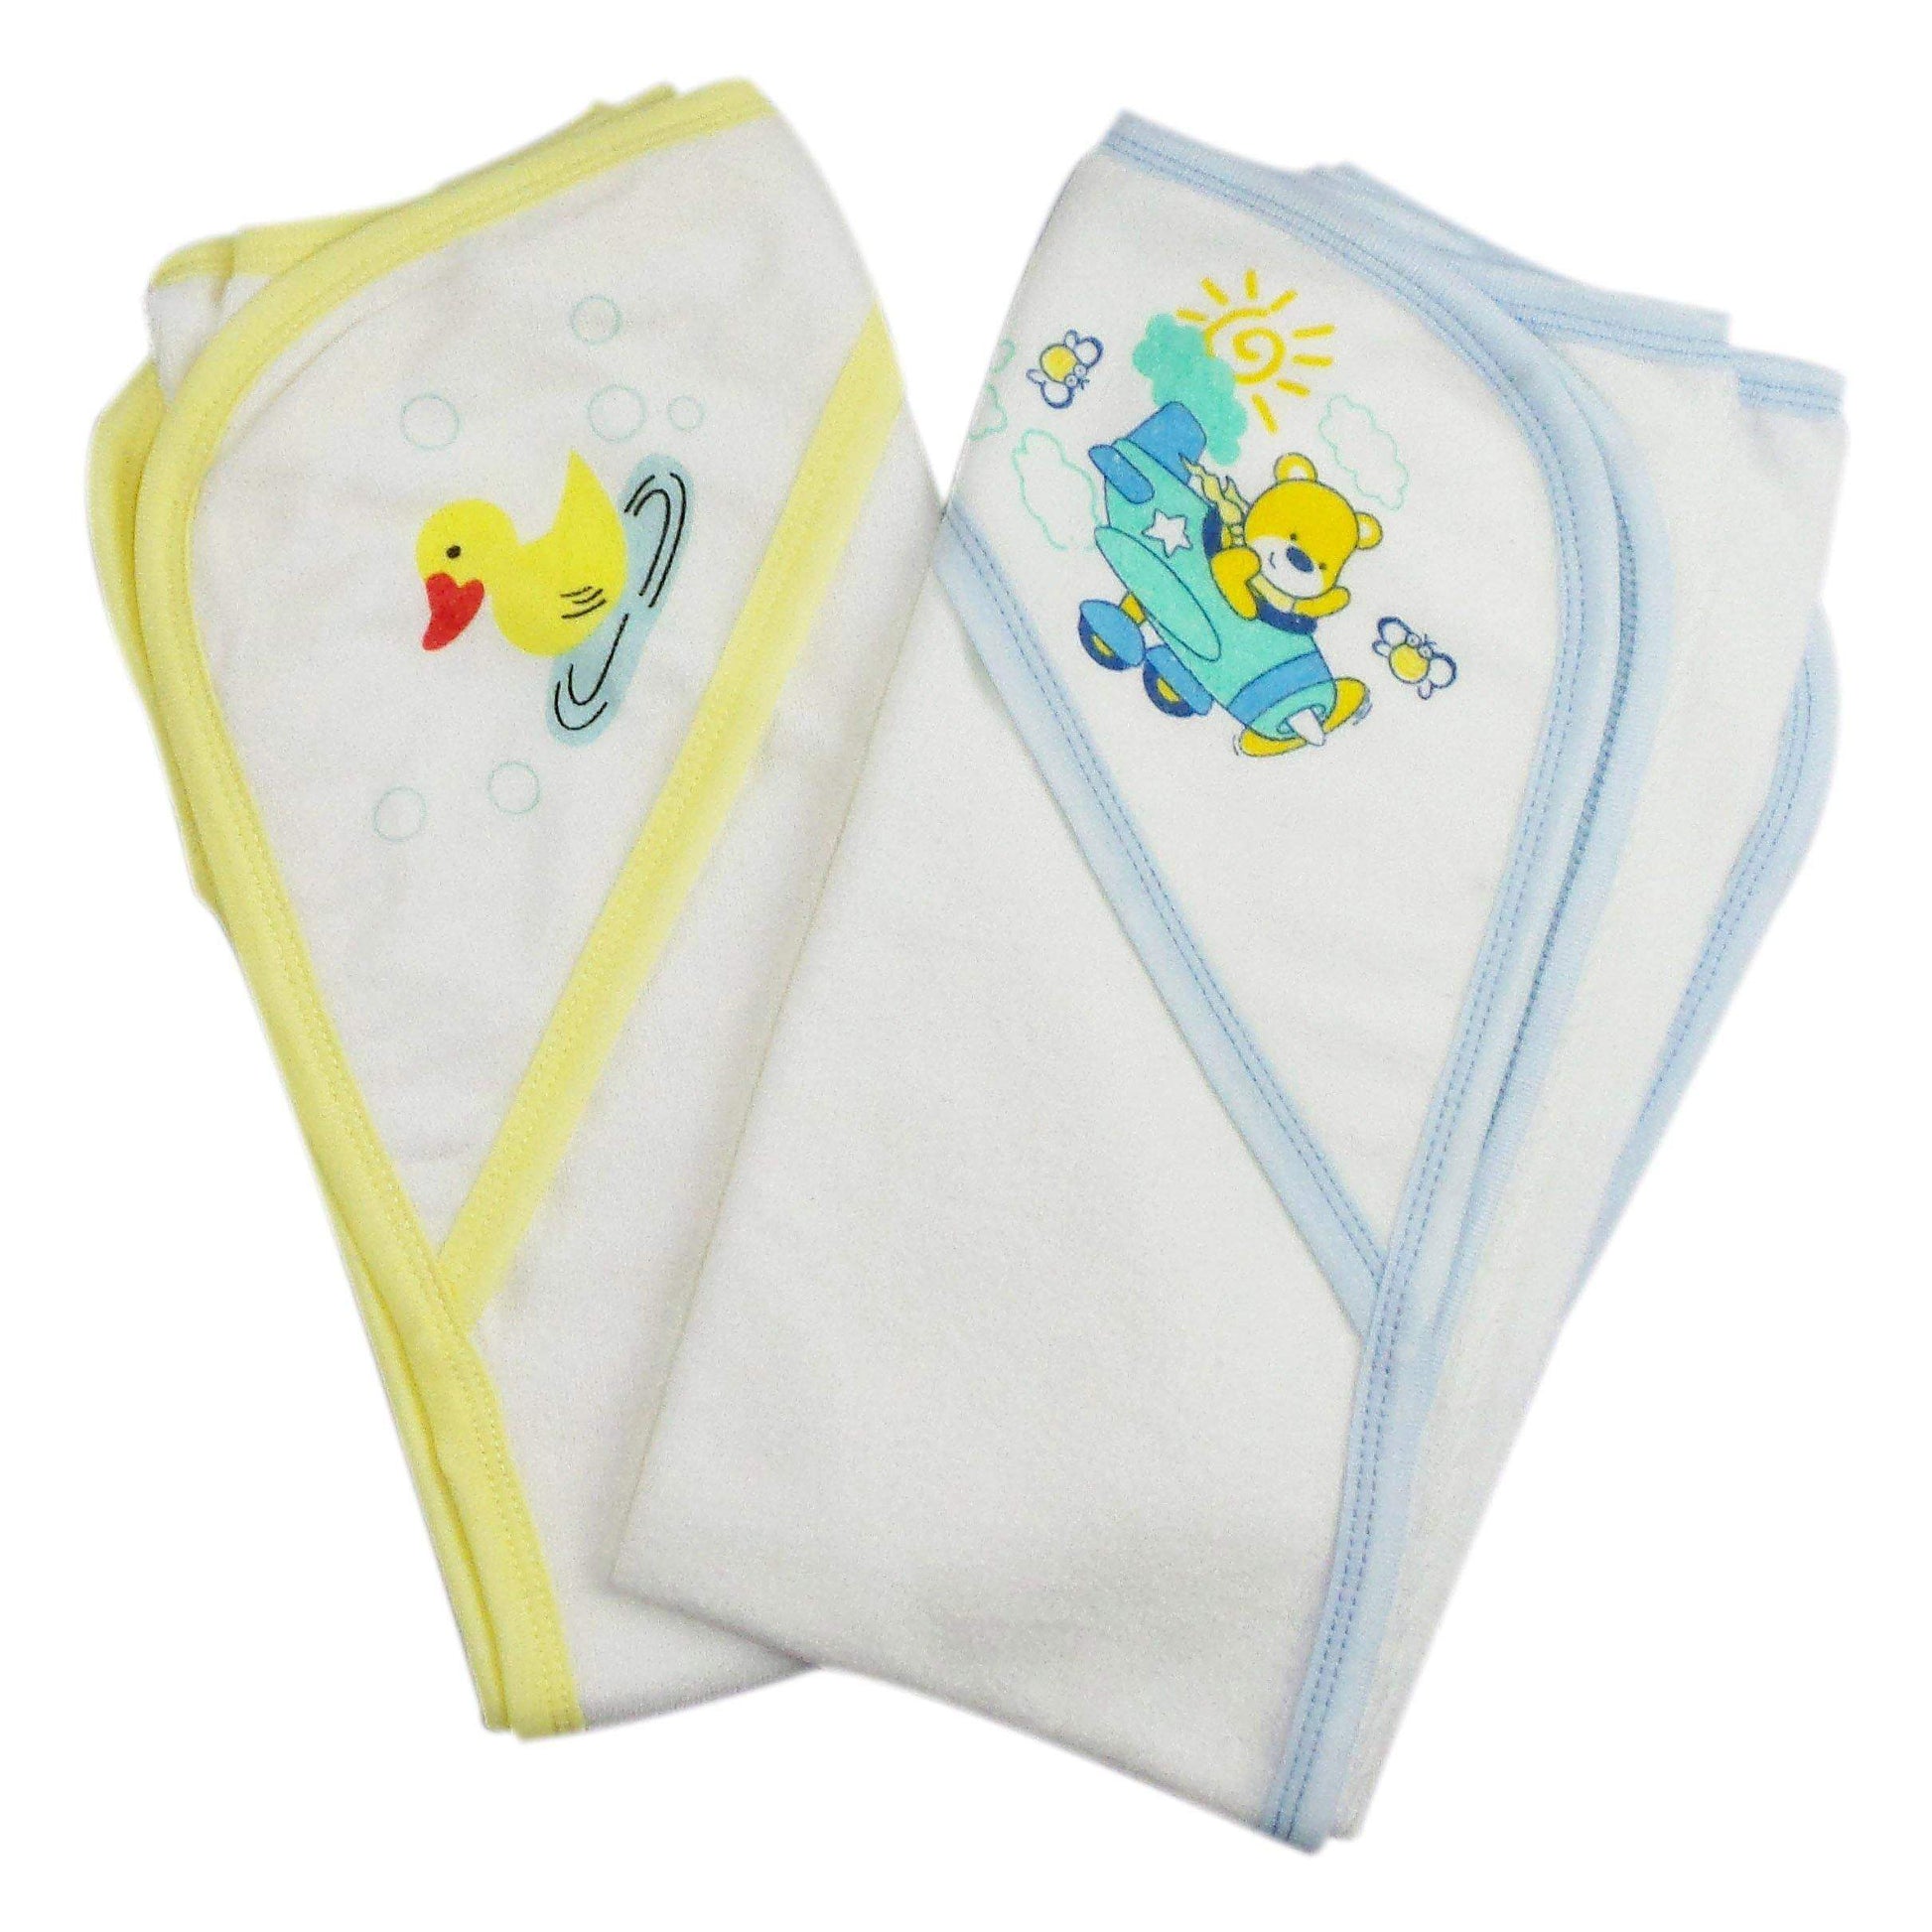 Bambini Infant Hooded Bath Towel (Pack of 2)-Bambini-Baby Clothes,Bath Robes,Towels